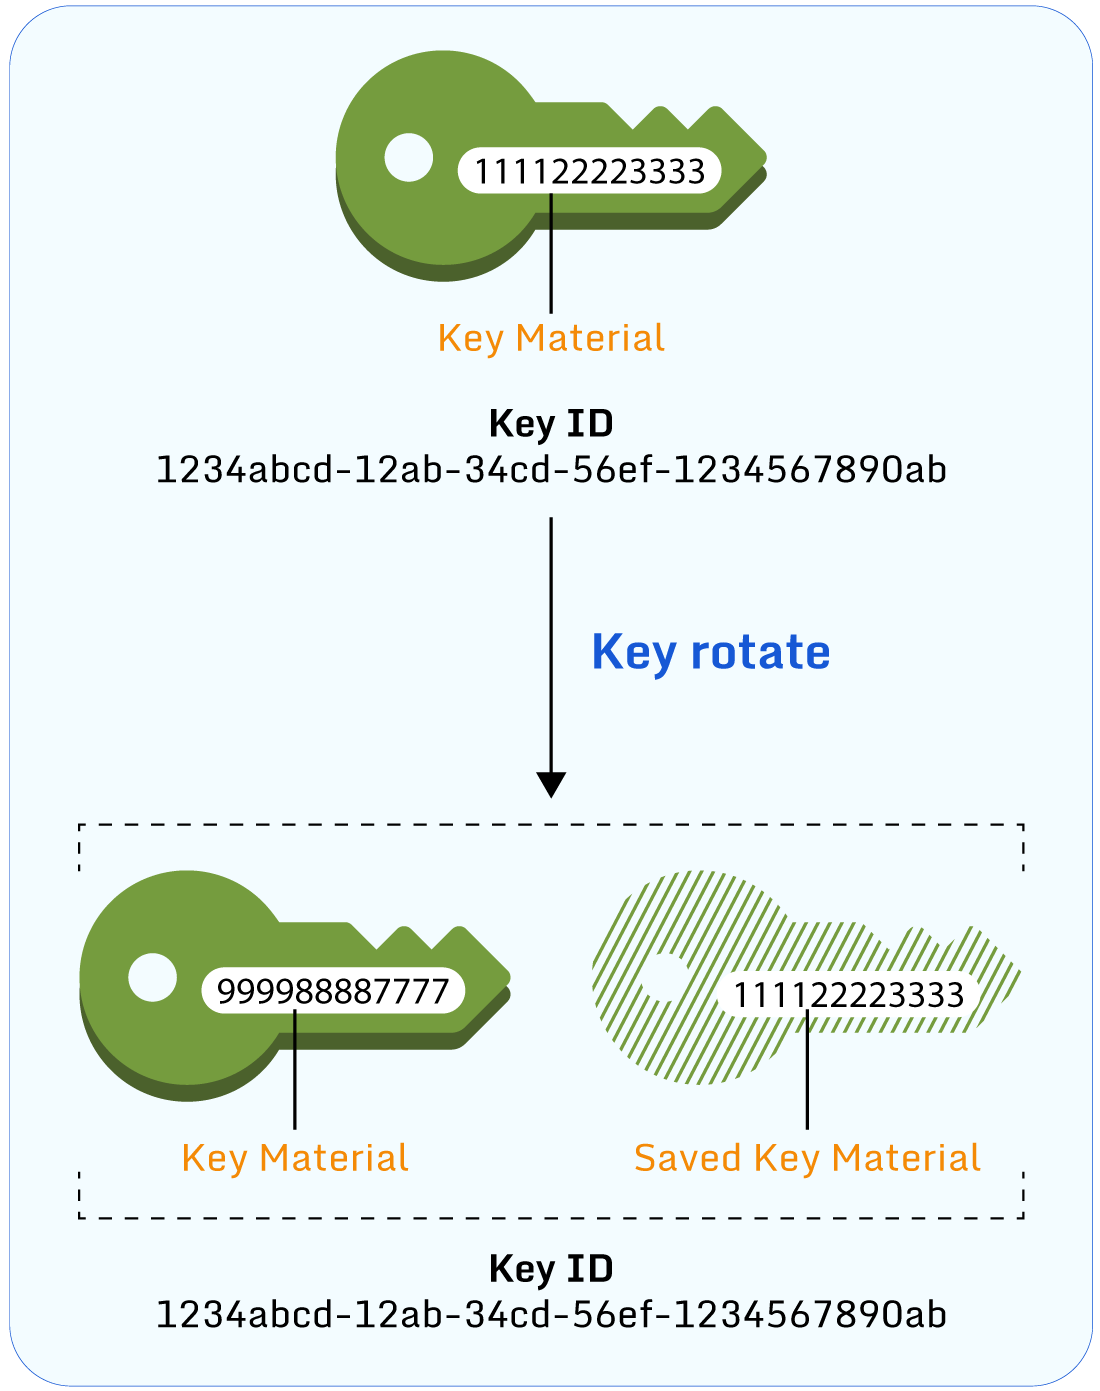 Automatic key rotation in AWS KMS.